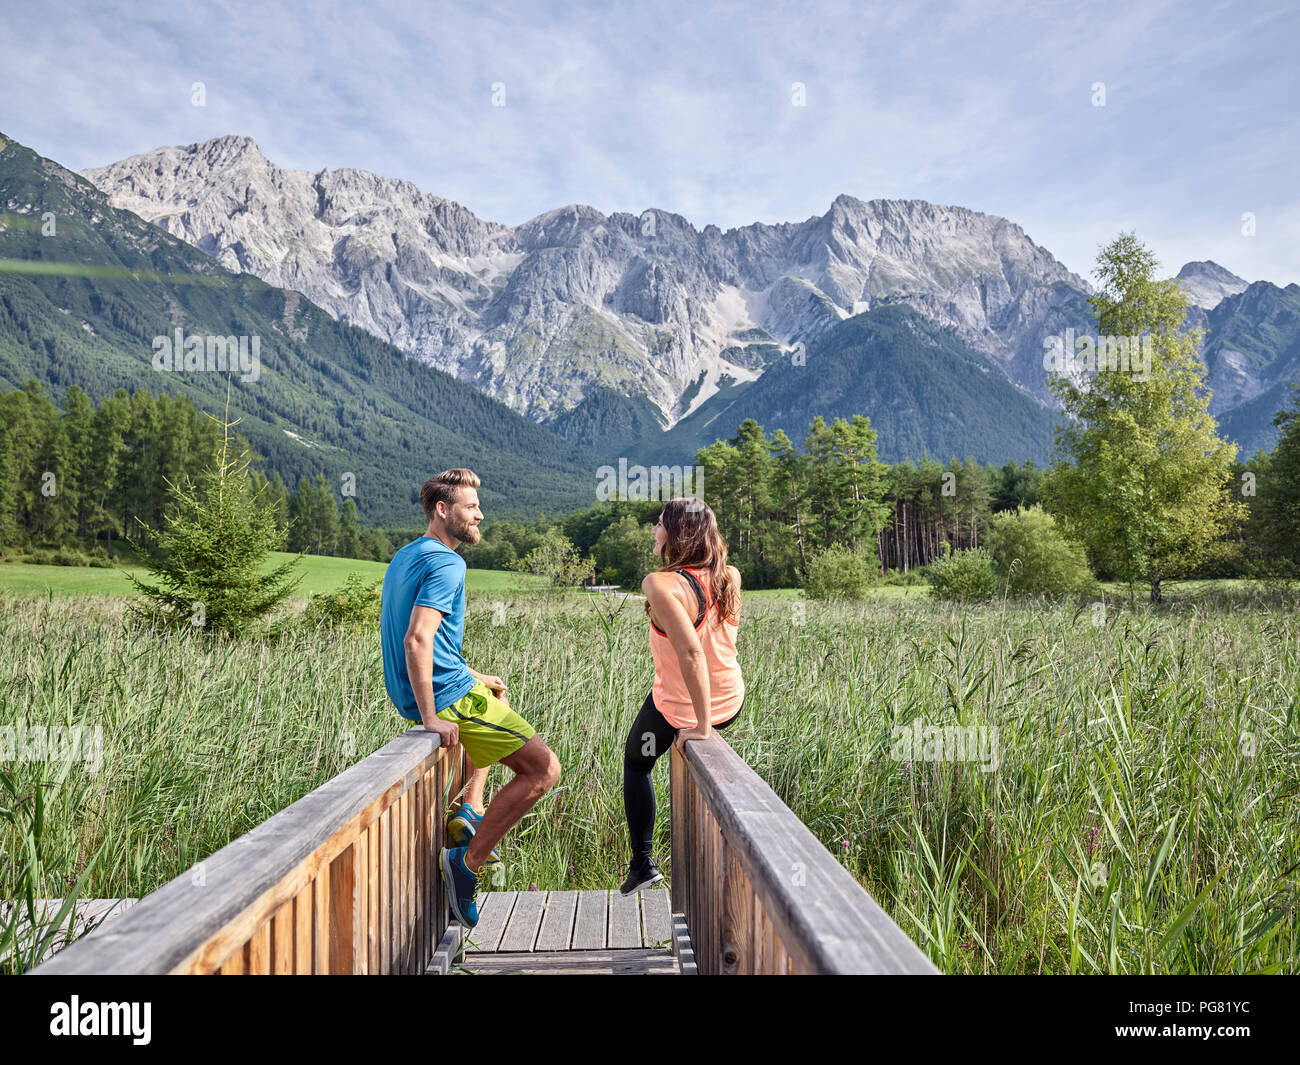 Austria, Tyrol, Mieming, couple resting on a boardwalk in the mountains Stock Photo